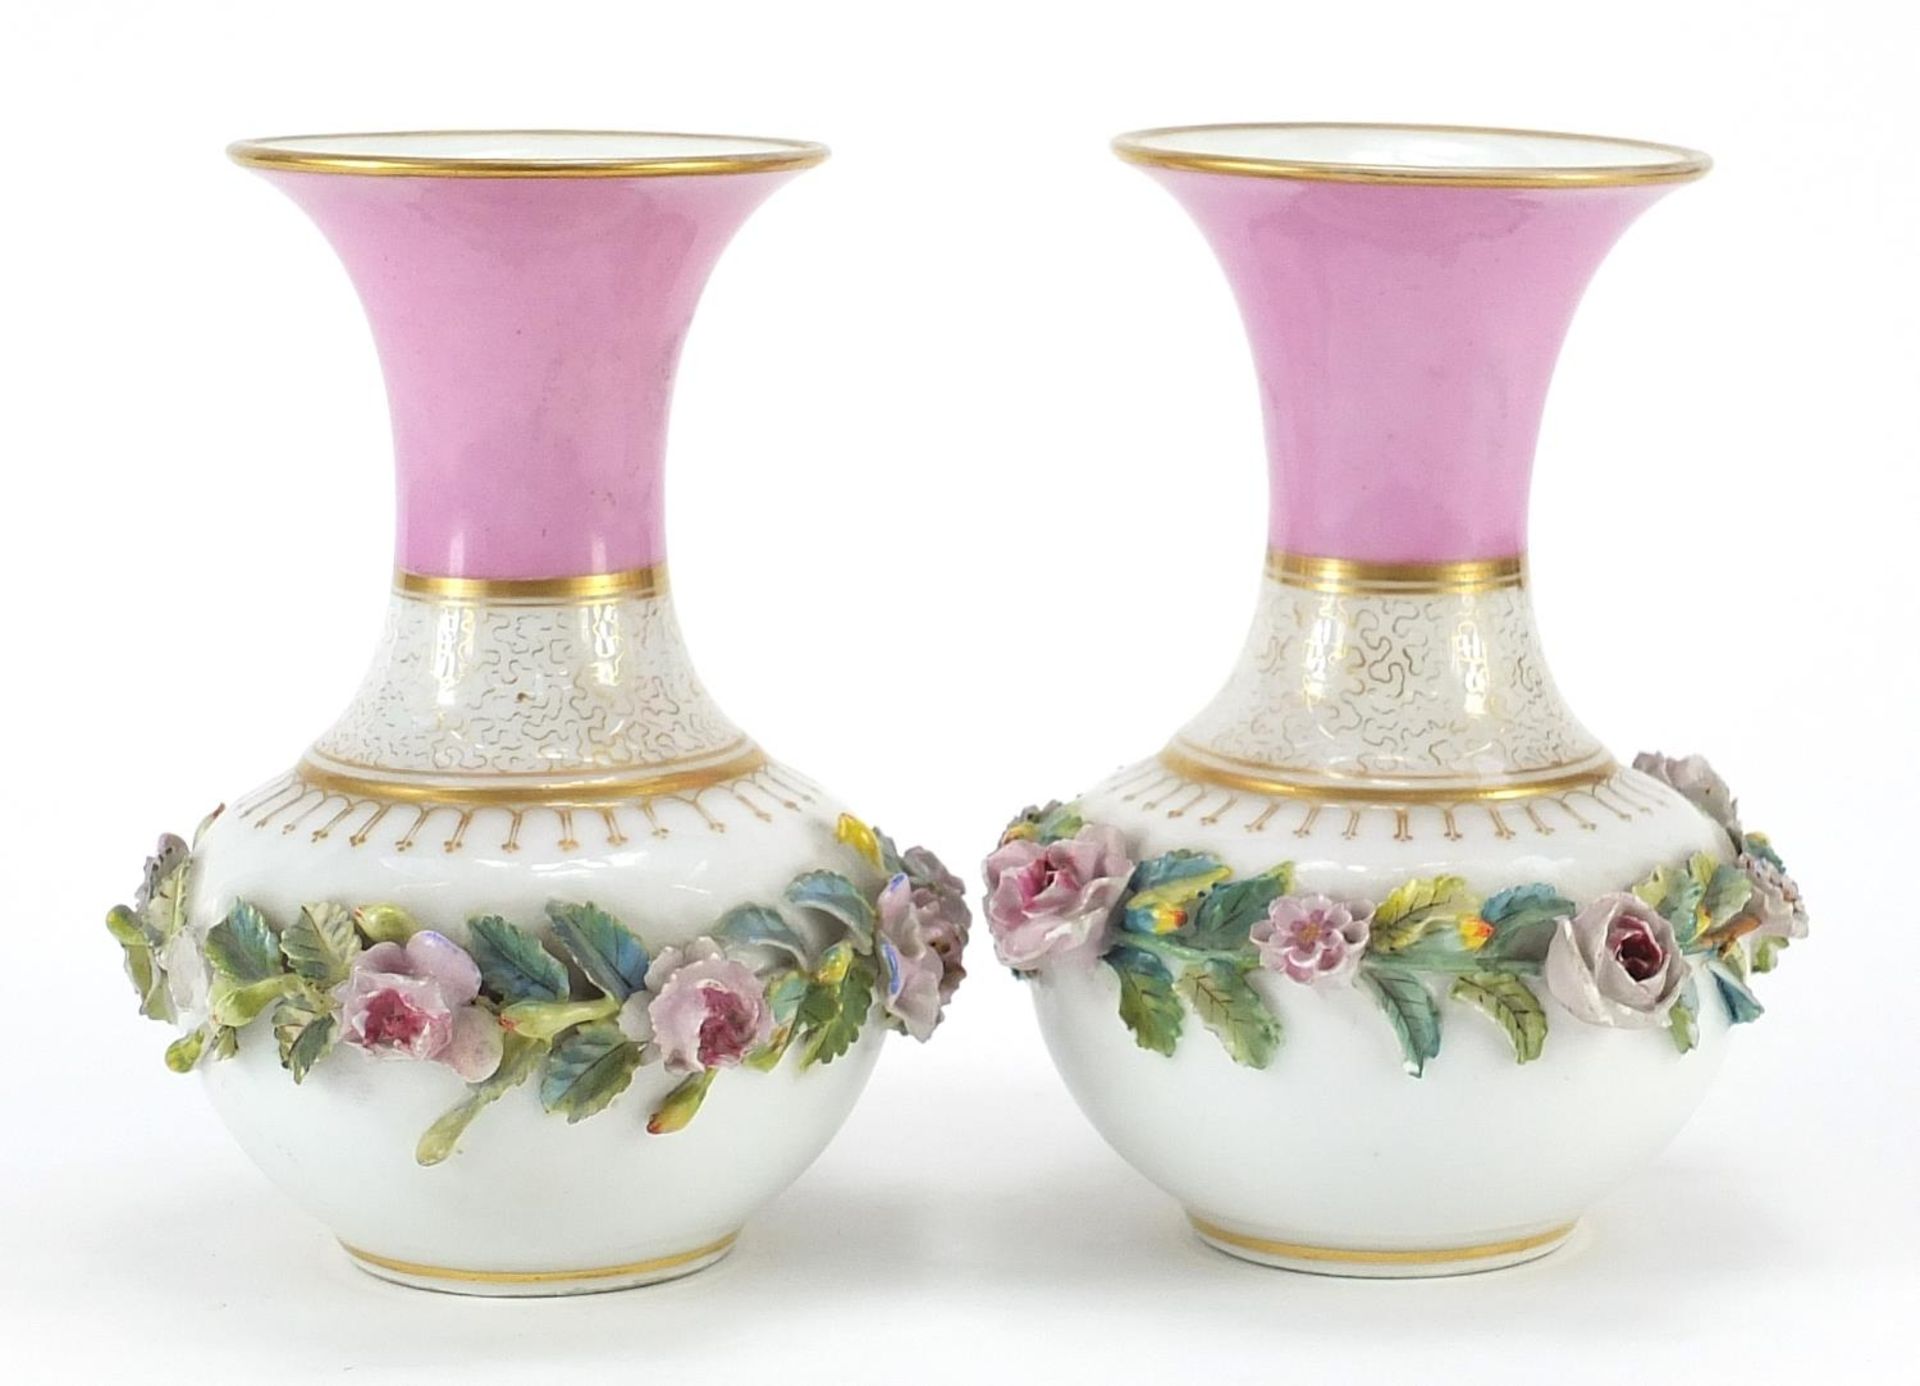 Pair of 19th century French pink ground vases with floral encrusted band, each 16cm high - Image 2 of 3